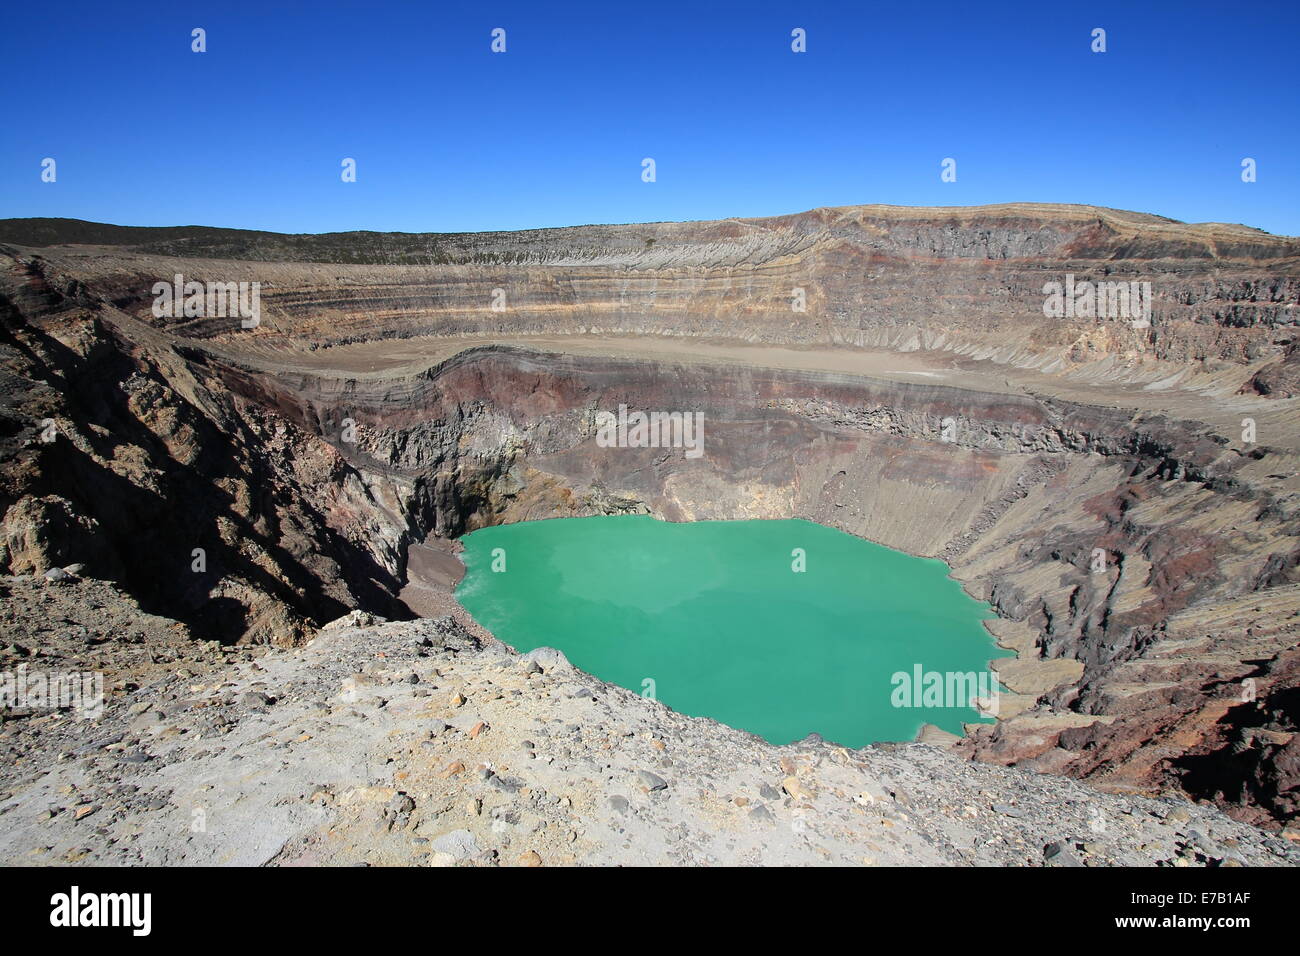 The blue-green lake in the crater of Santa Ana (Ilamatepec) volcano, El Salvador, bubbles slowly due to the geothermal heat. Stock Photo